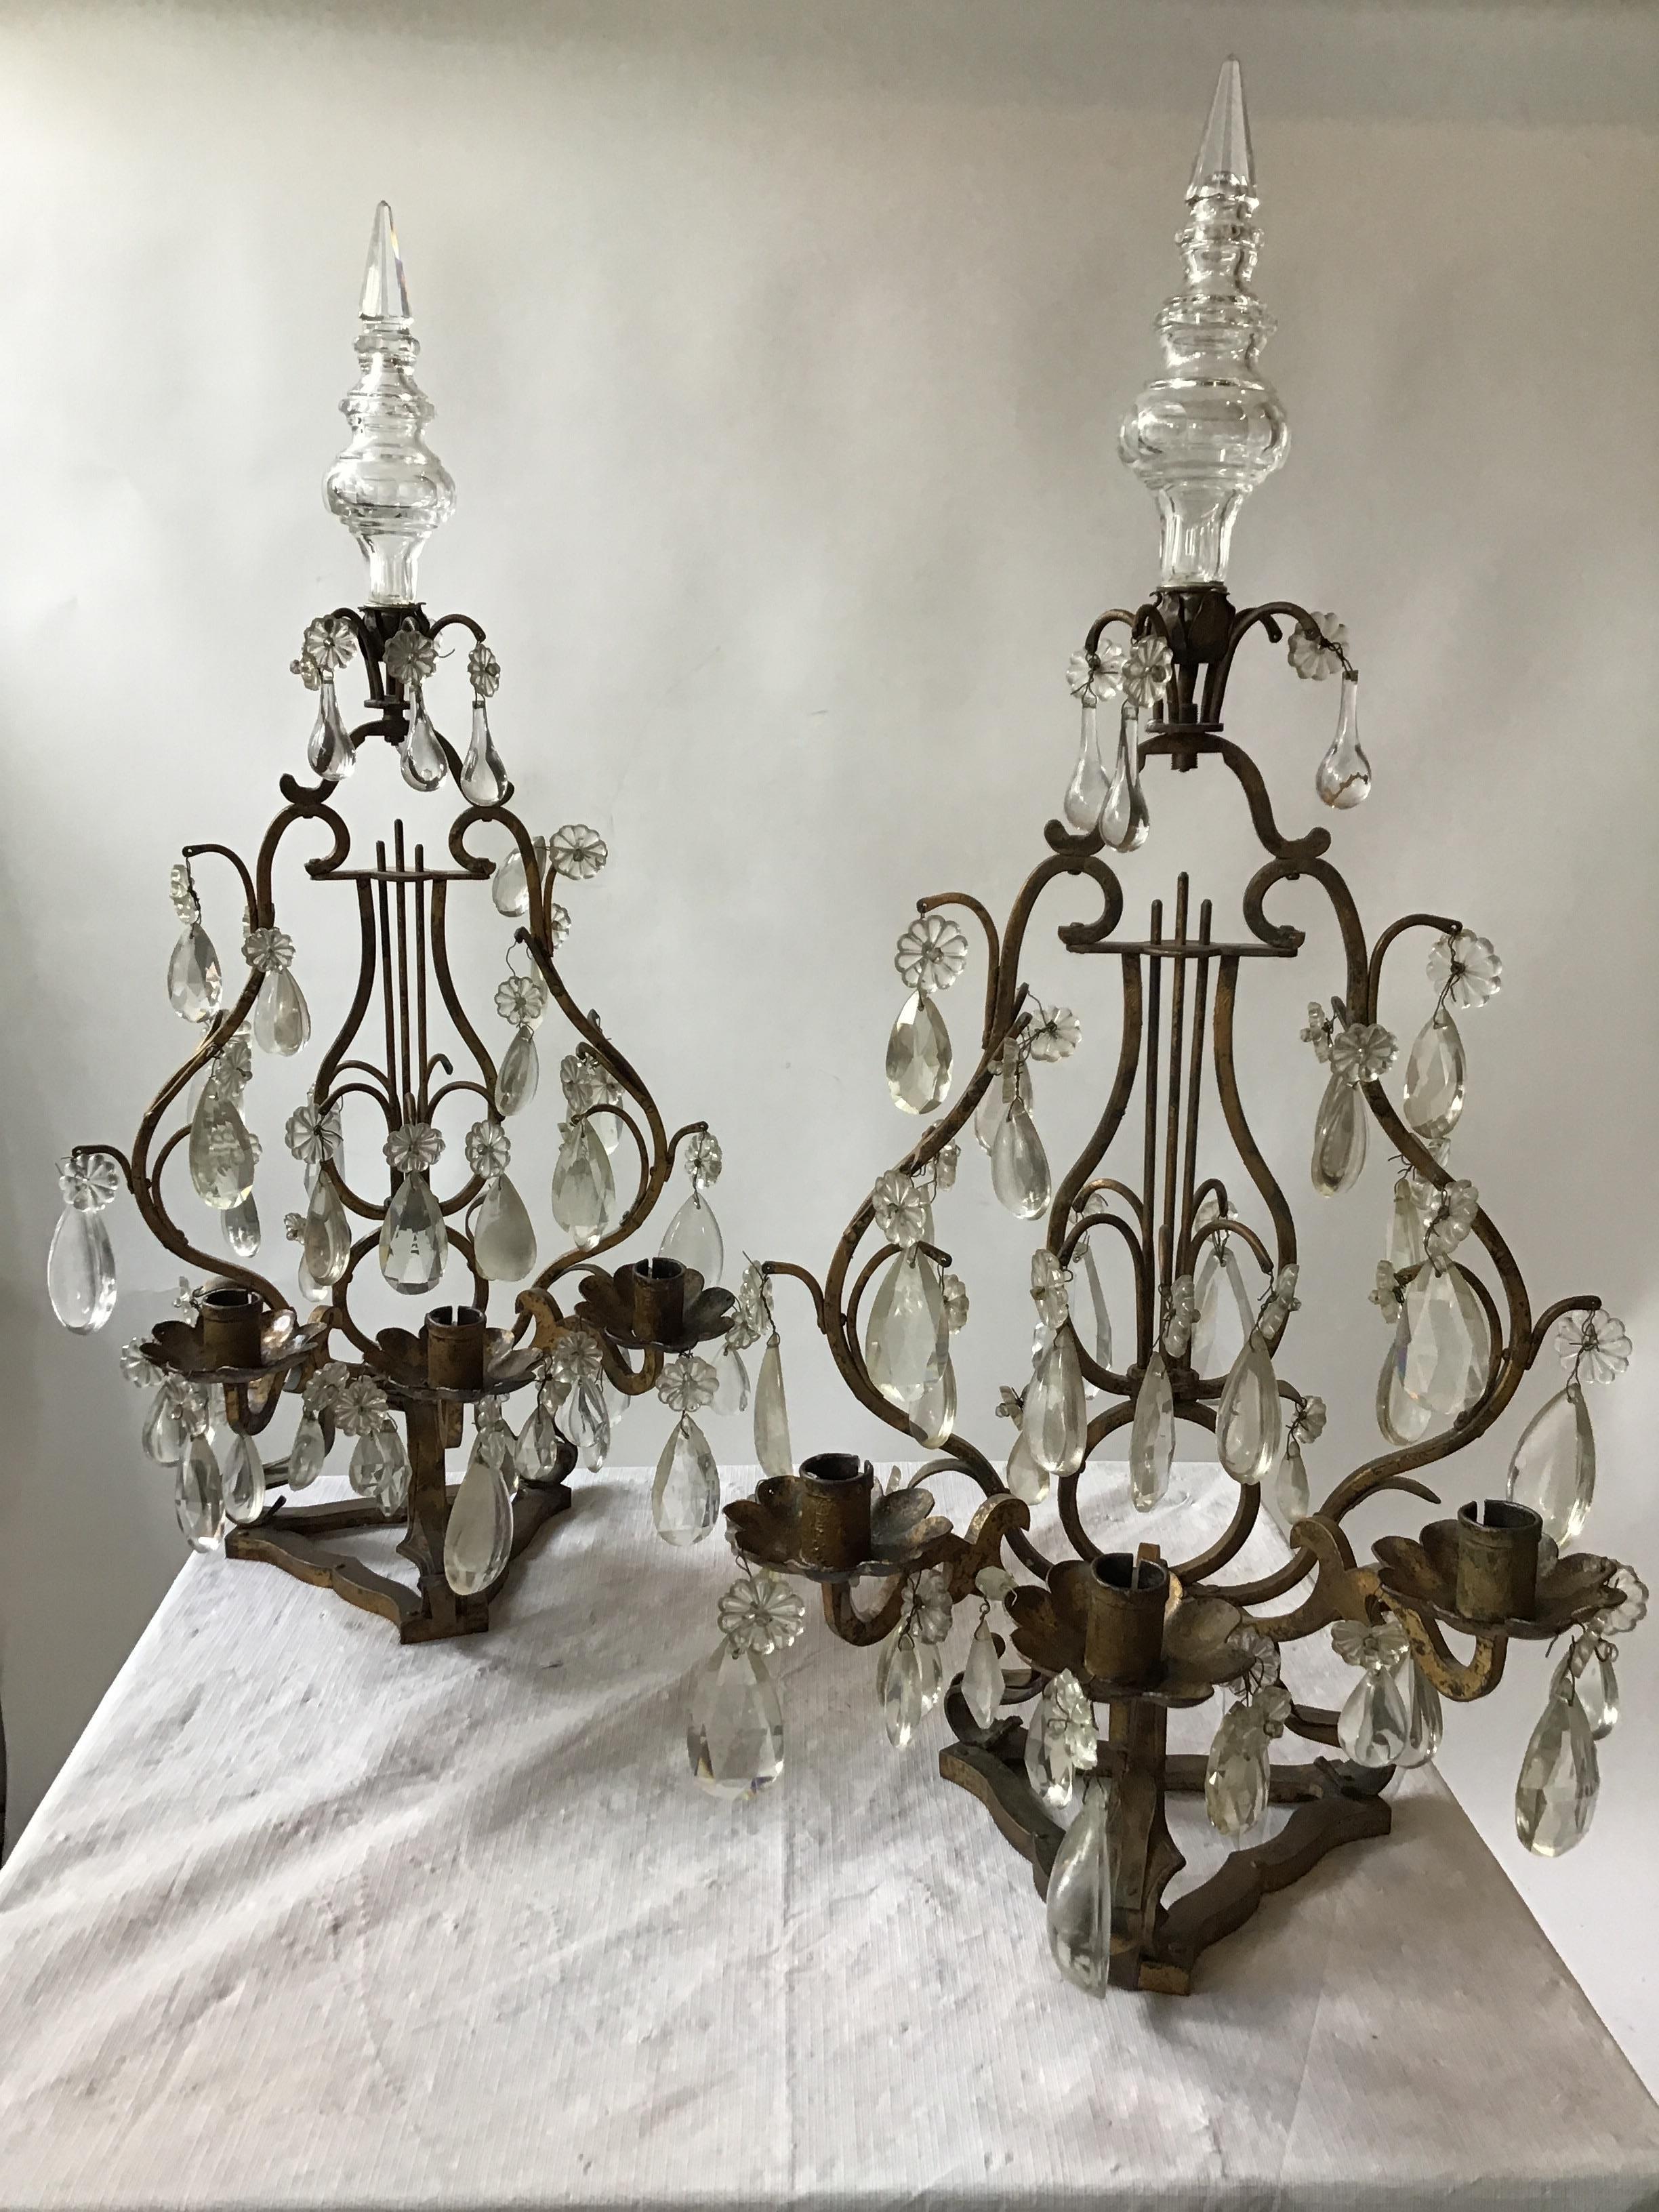 Pair of 1950s Italian gilt-iron and crystal candelabras. Non electrified.
These items can be shipped UPS.